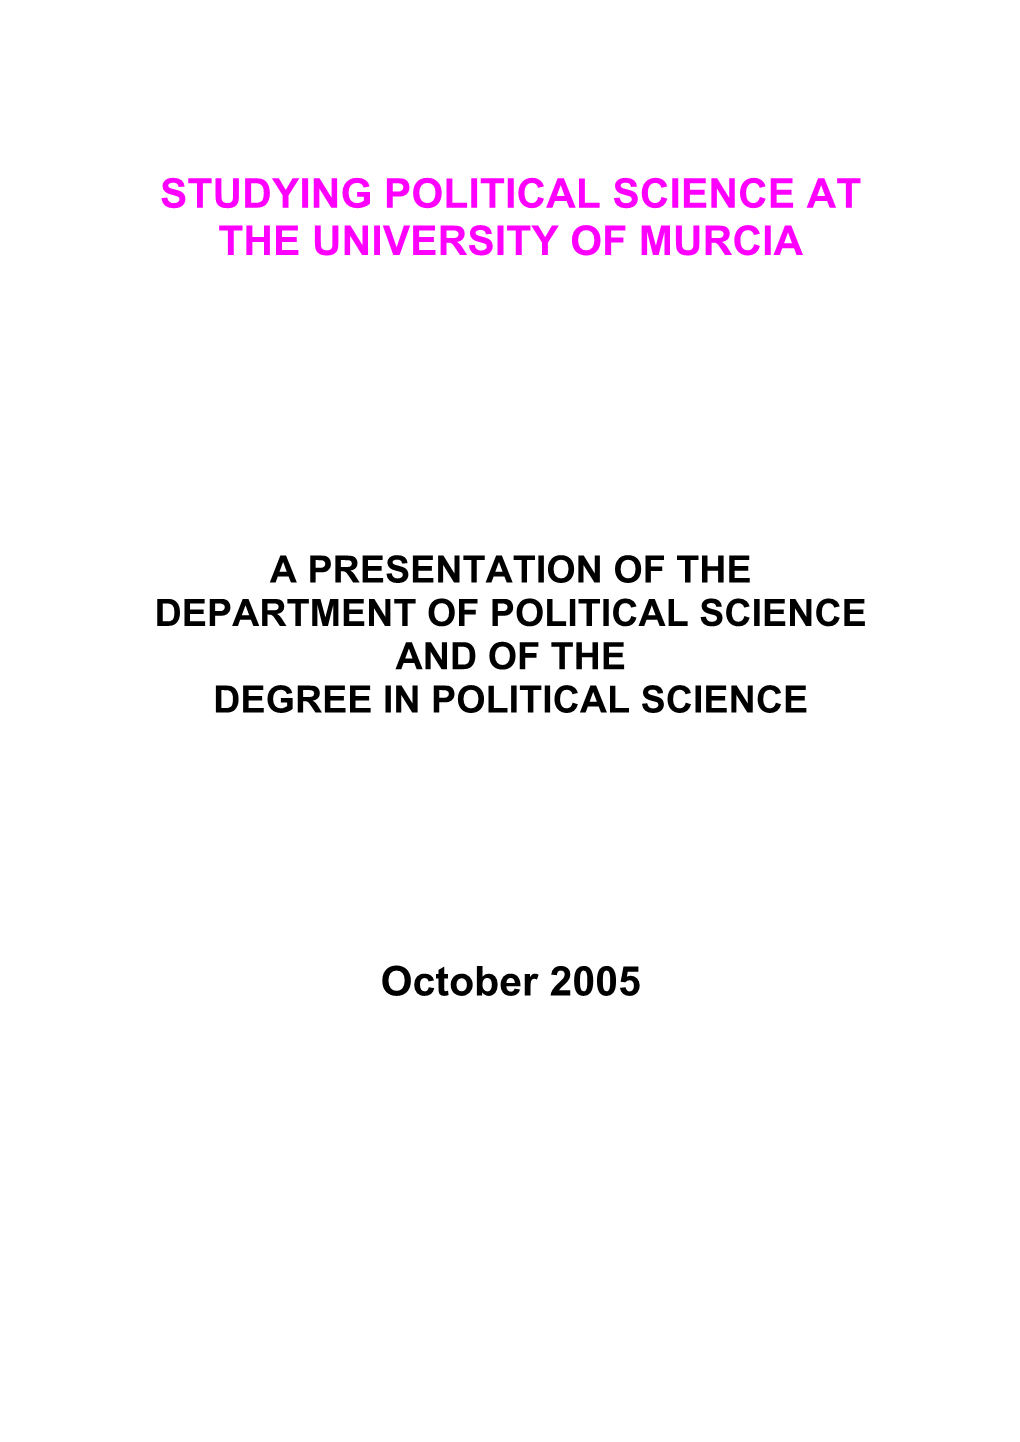 Studying Political Science at the University of Murcia